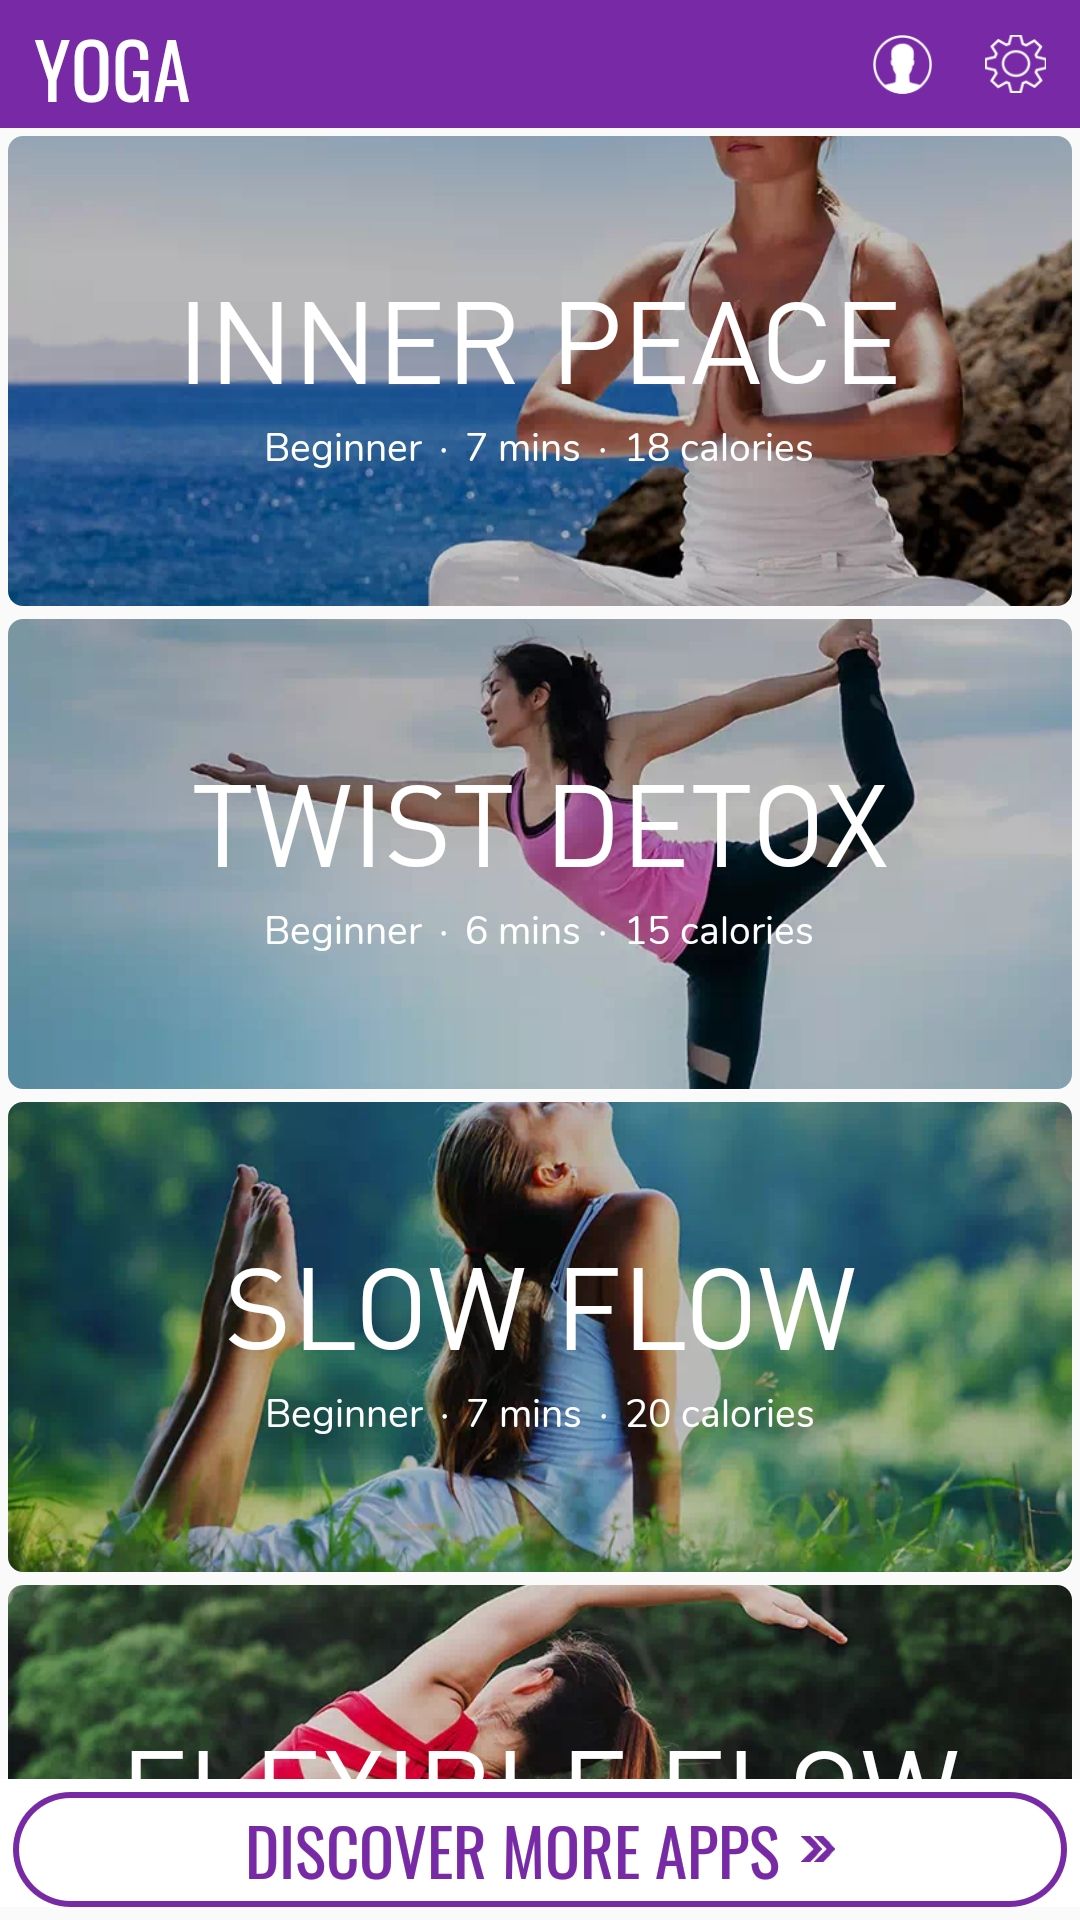 Yoga by 7M mobile yoga fitness app